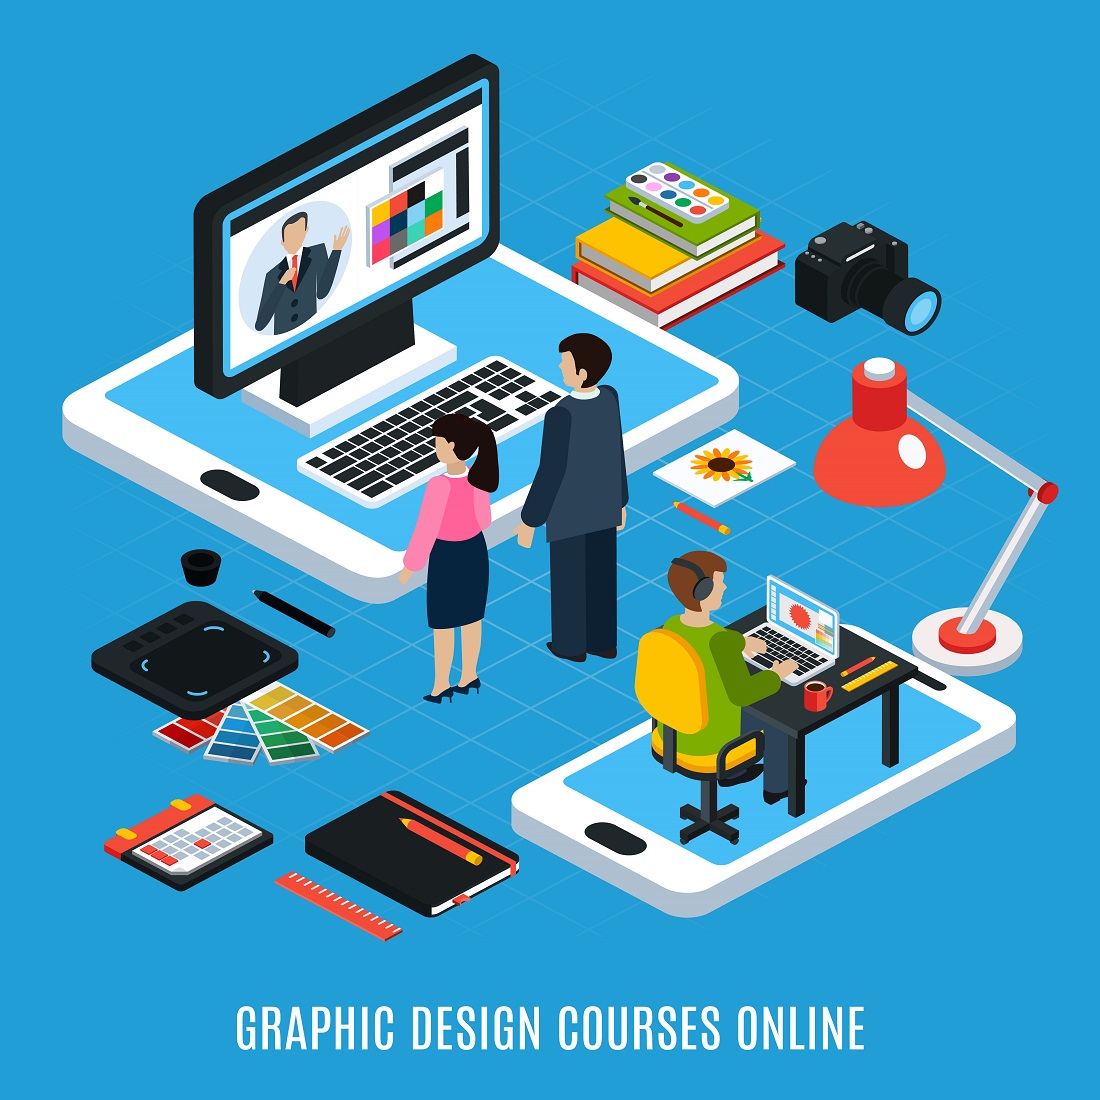 Online graphic design courses isometric concept with students computer tablet swatches preview image.